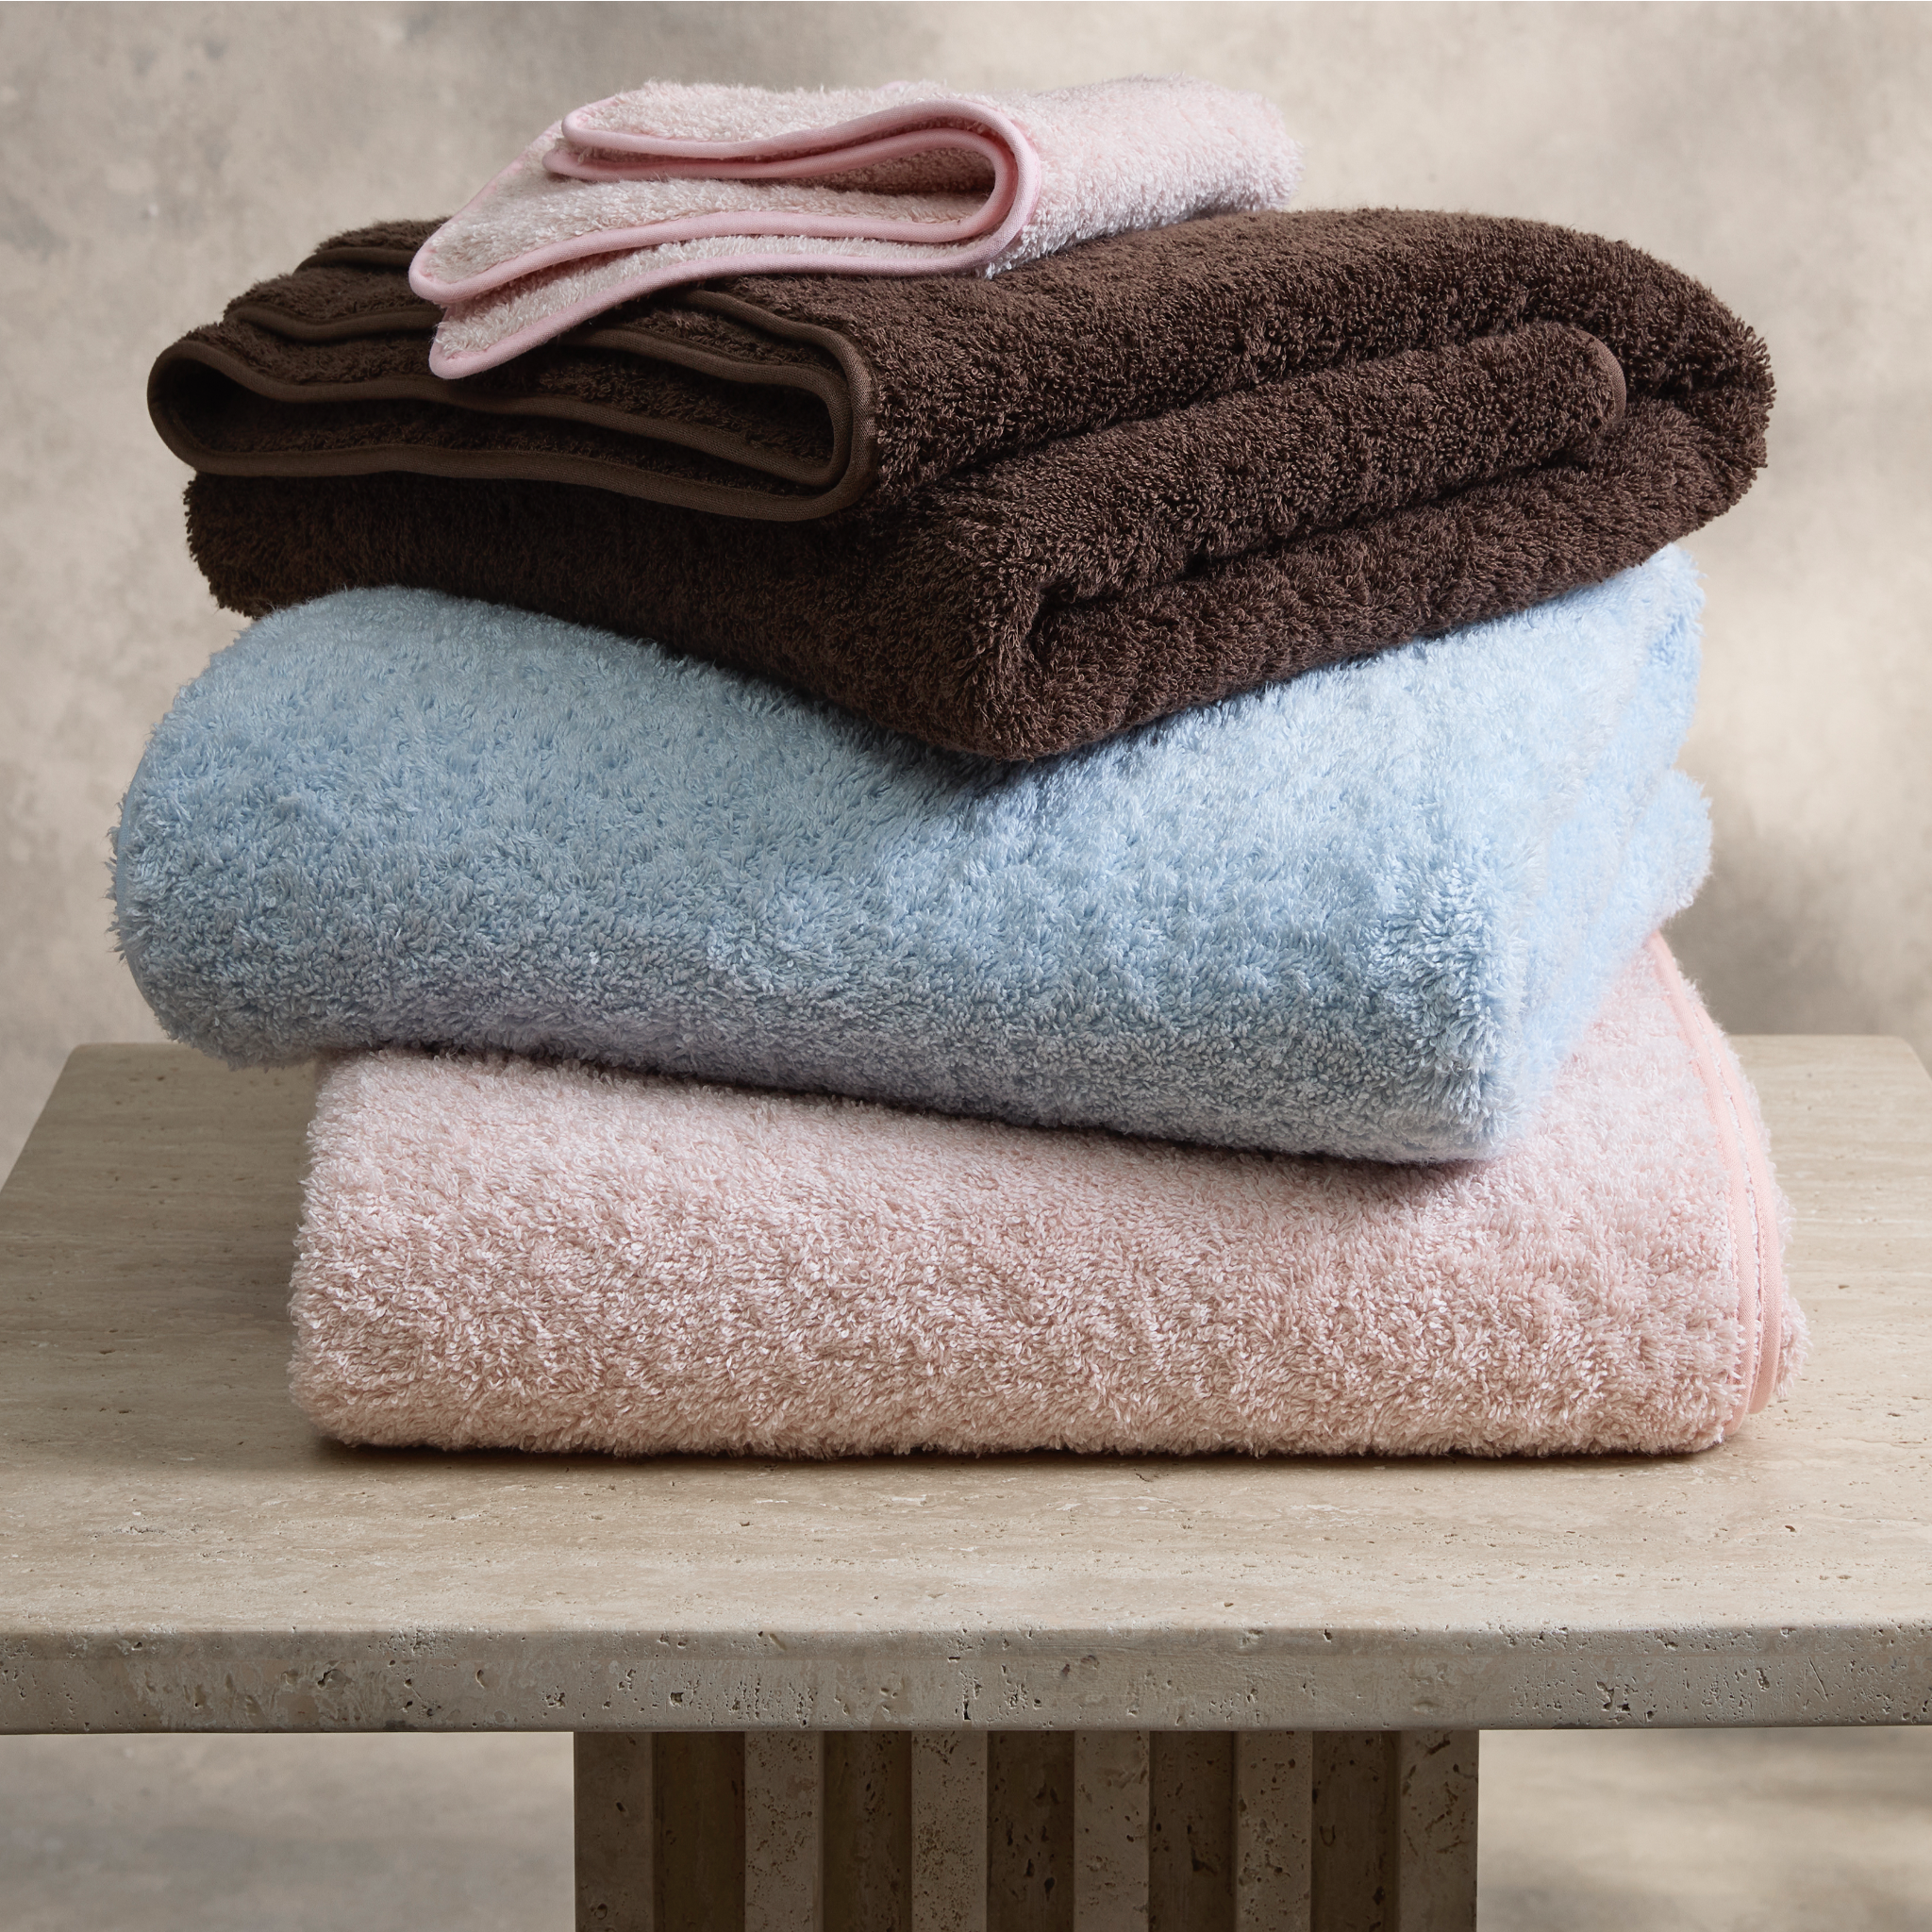 China Towel Factory Bath Towels with Terry Made of 100% Cotton Small Bath  Towel - China Cotton Towel and Bath Towel price